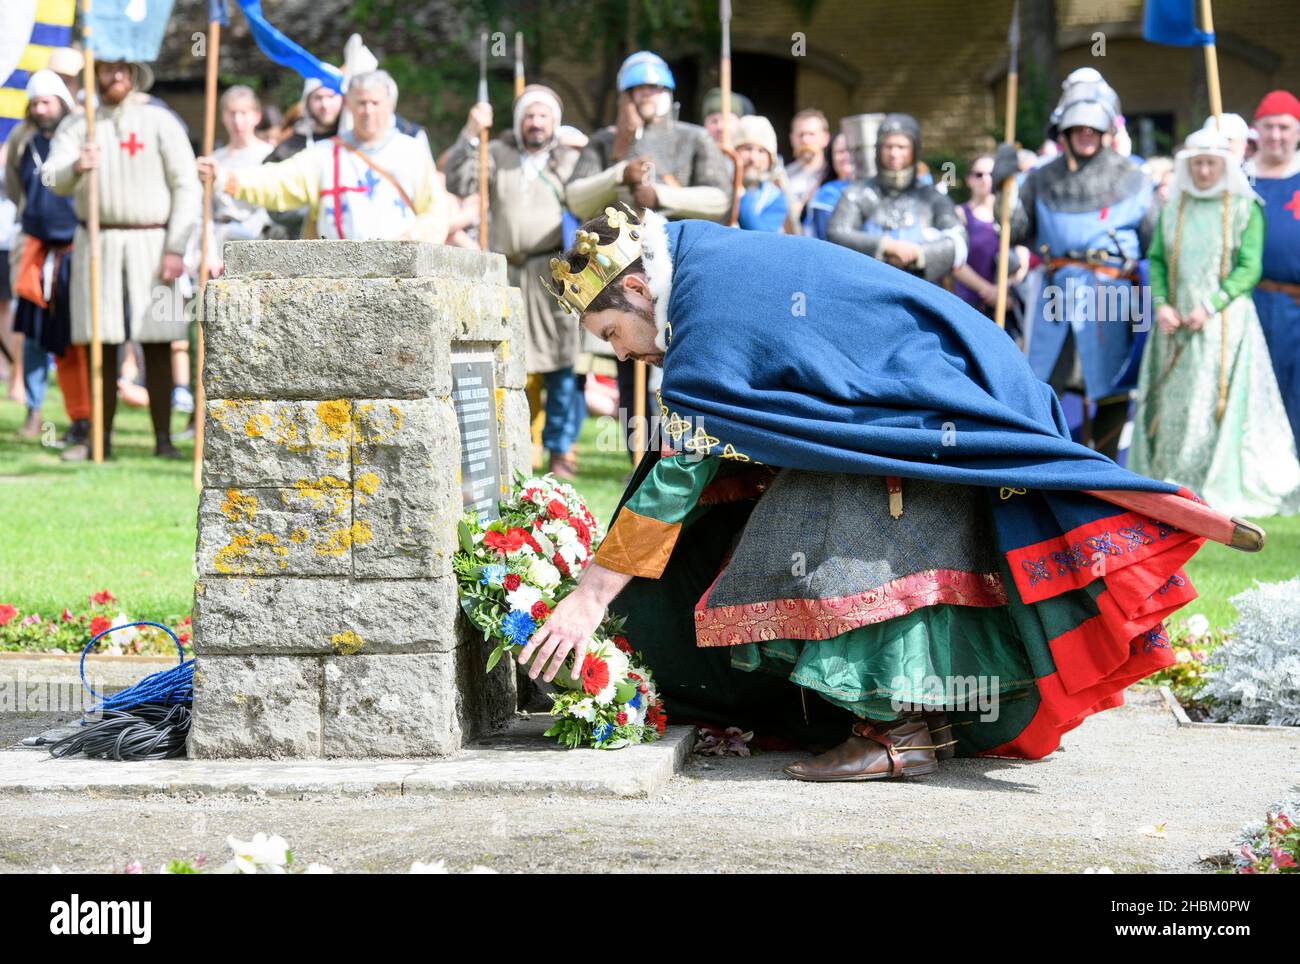 A medieval actor lays a wreath at the Simon de Montfort memorial at Abbey Ground before a later re-enactment of The Battle of Evesham. Stock Photo